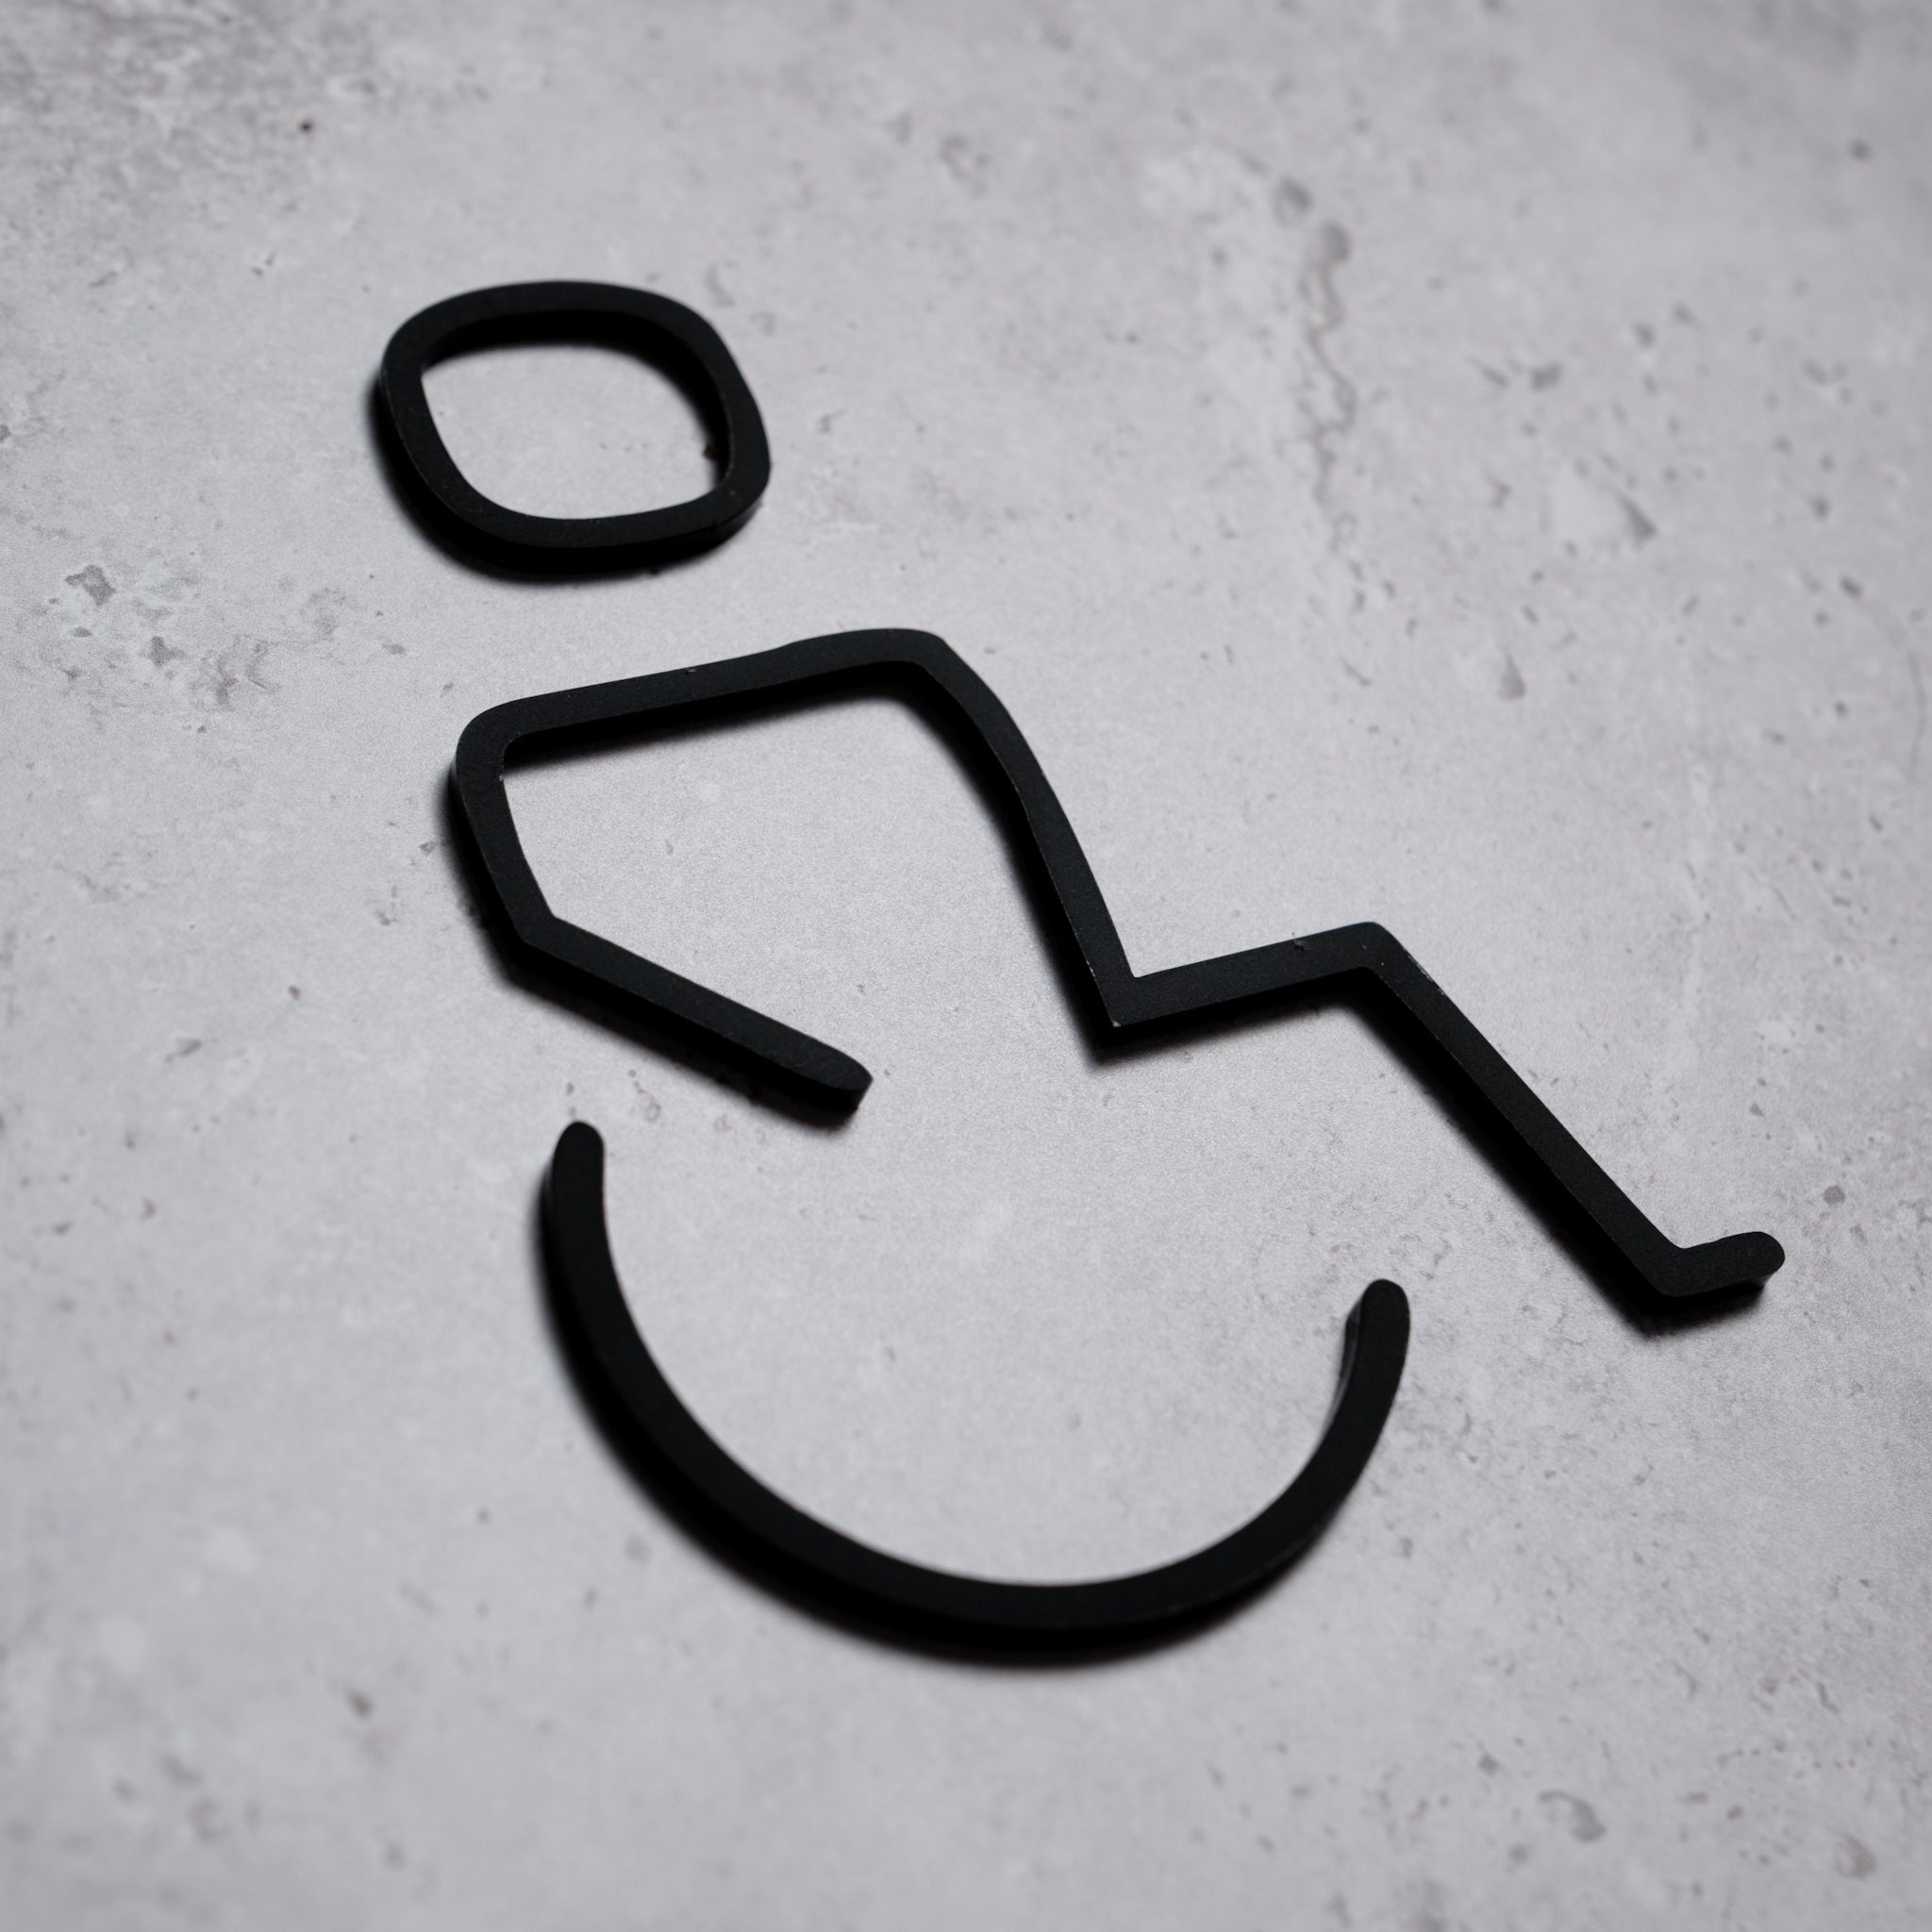 Disabled toilet signage